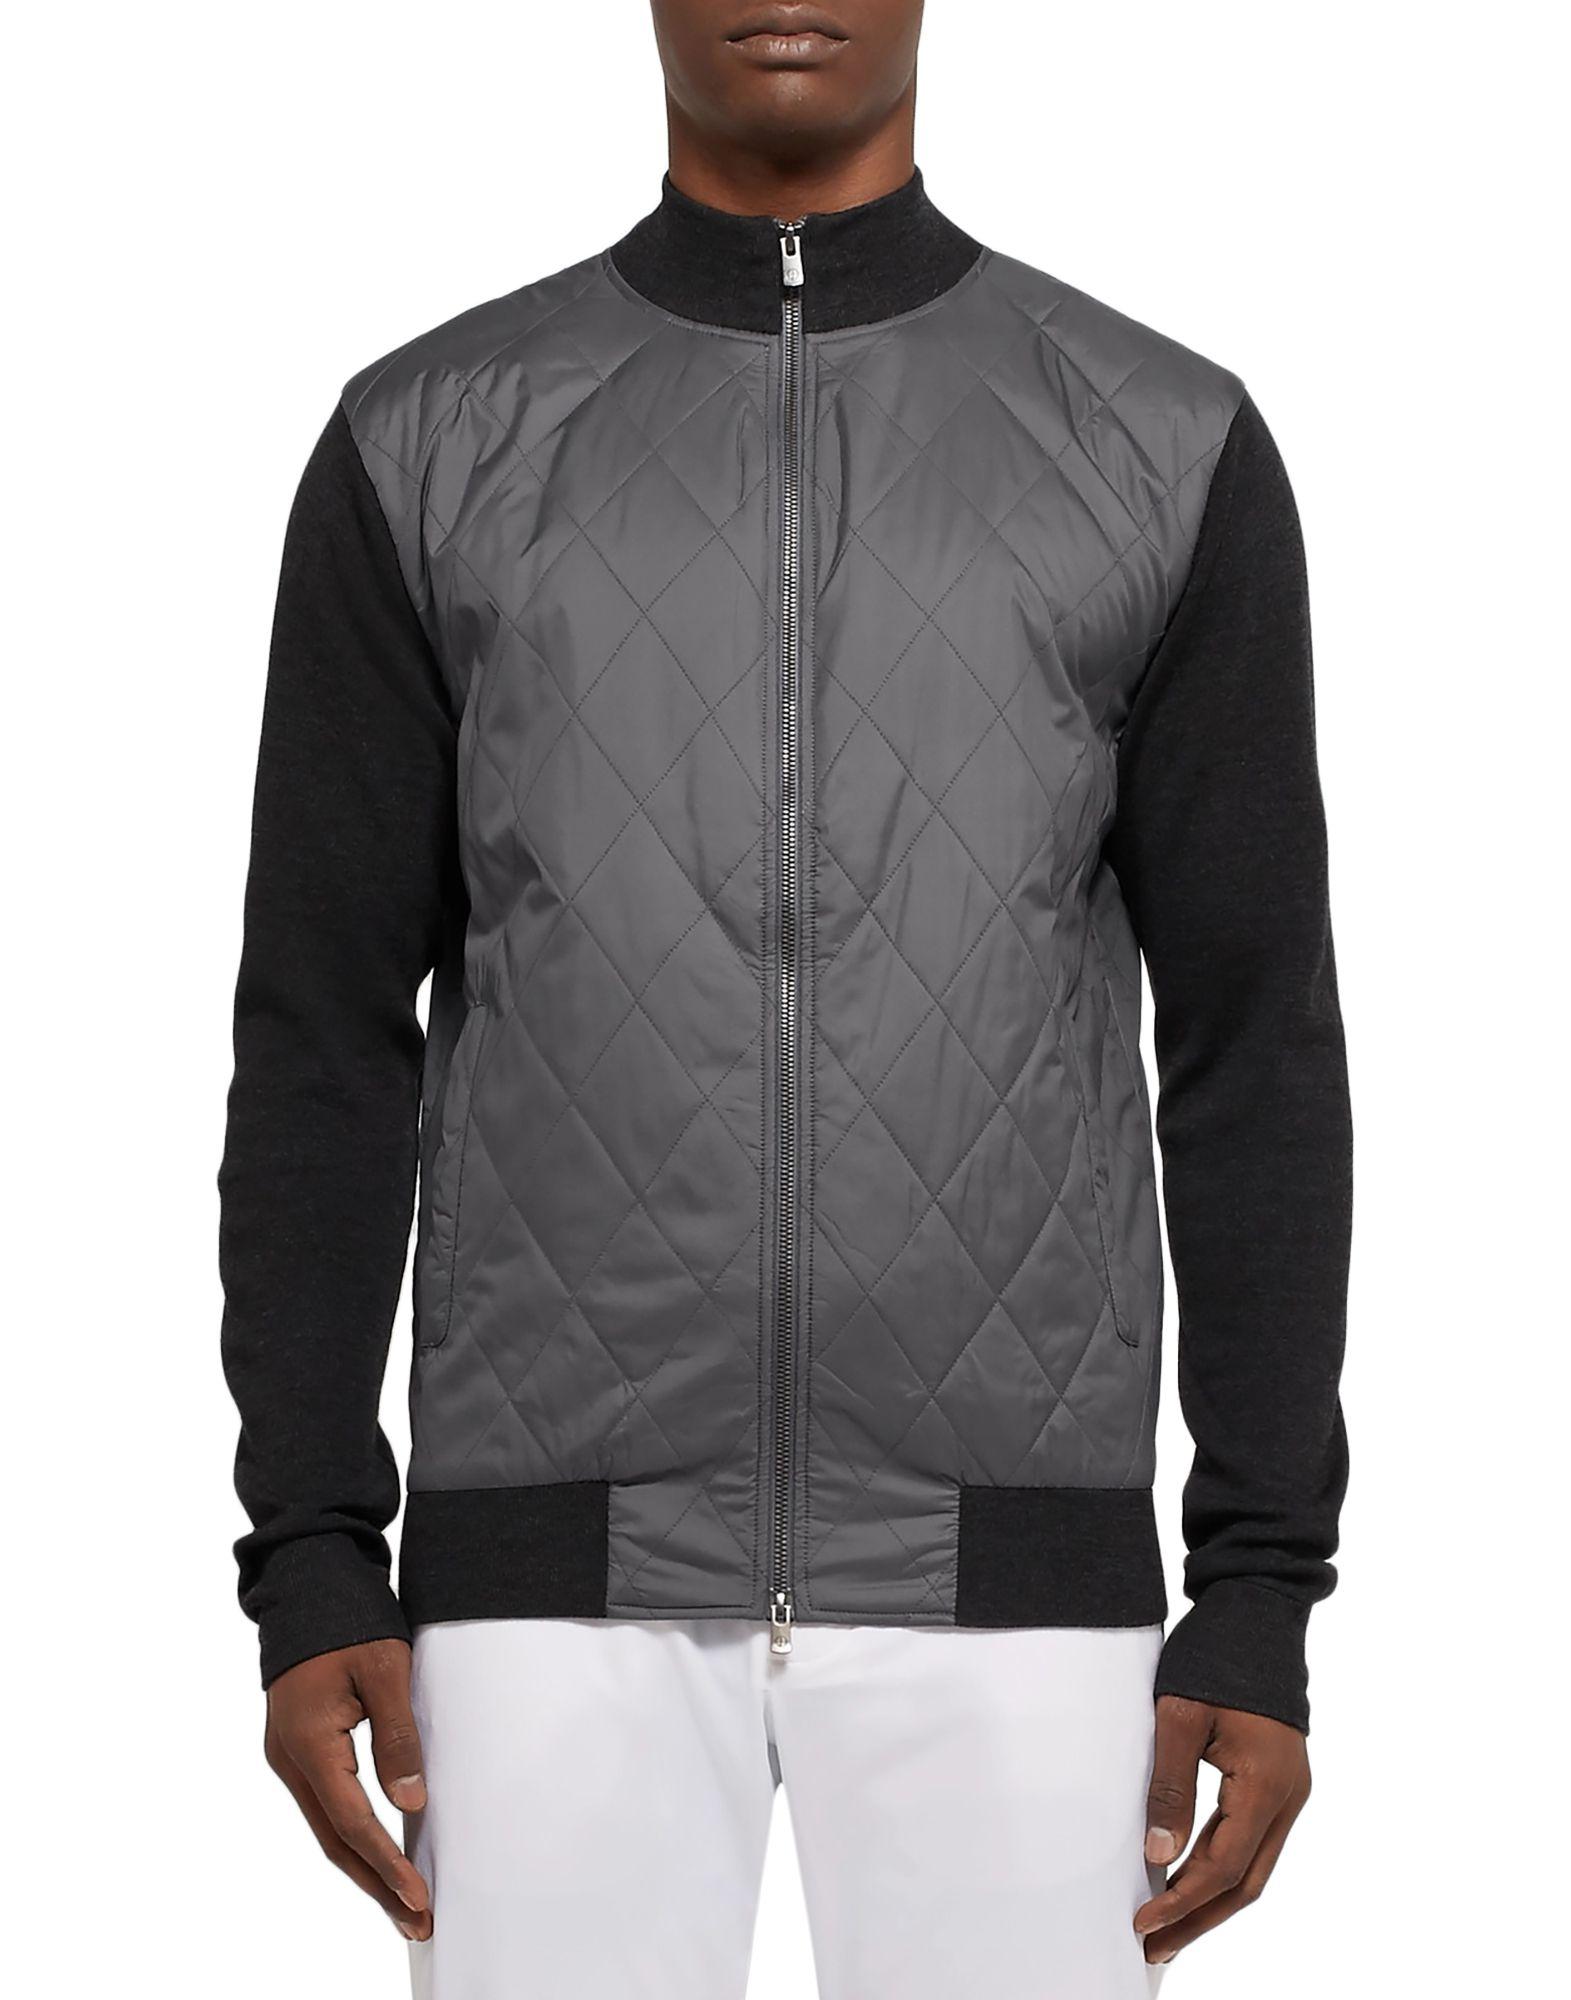 Dunhill Jacket in Gray for Men - Lyst